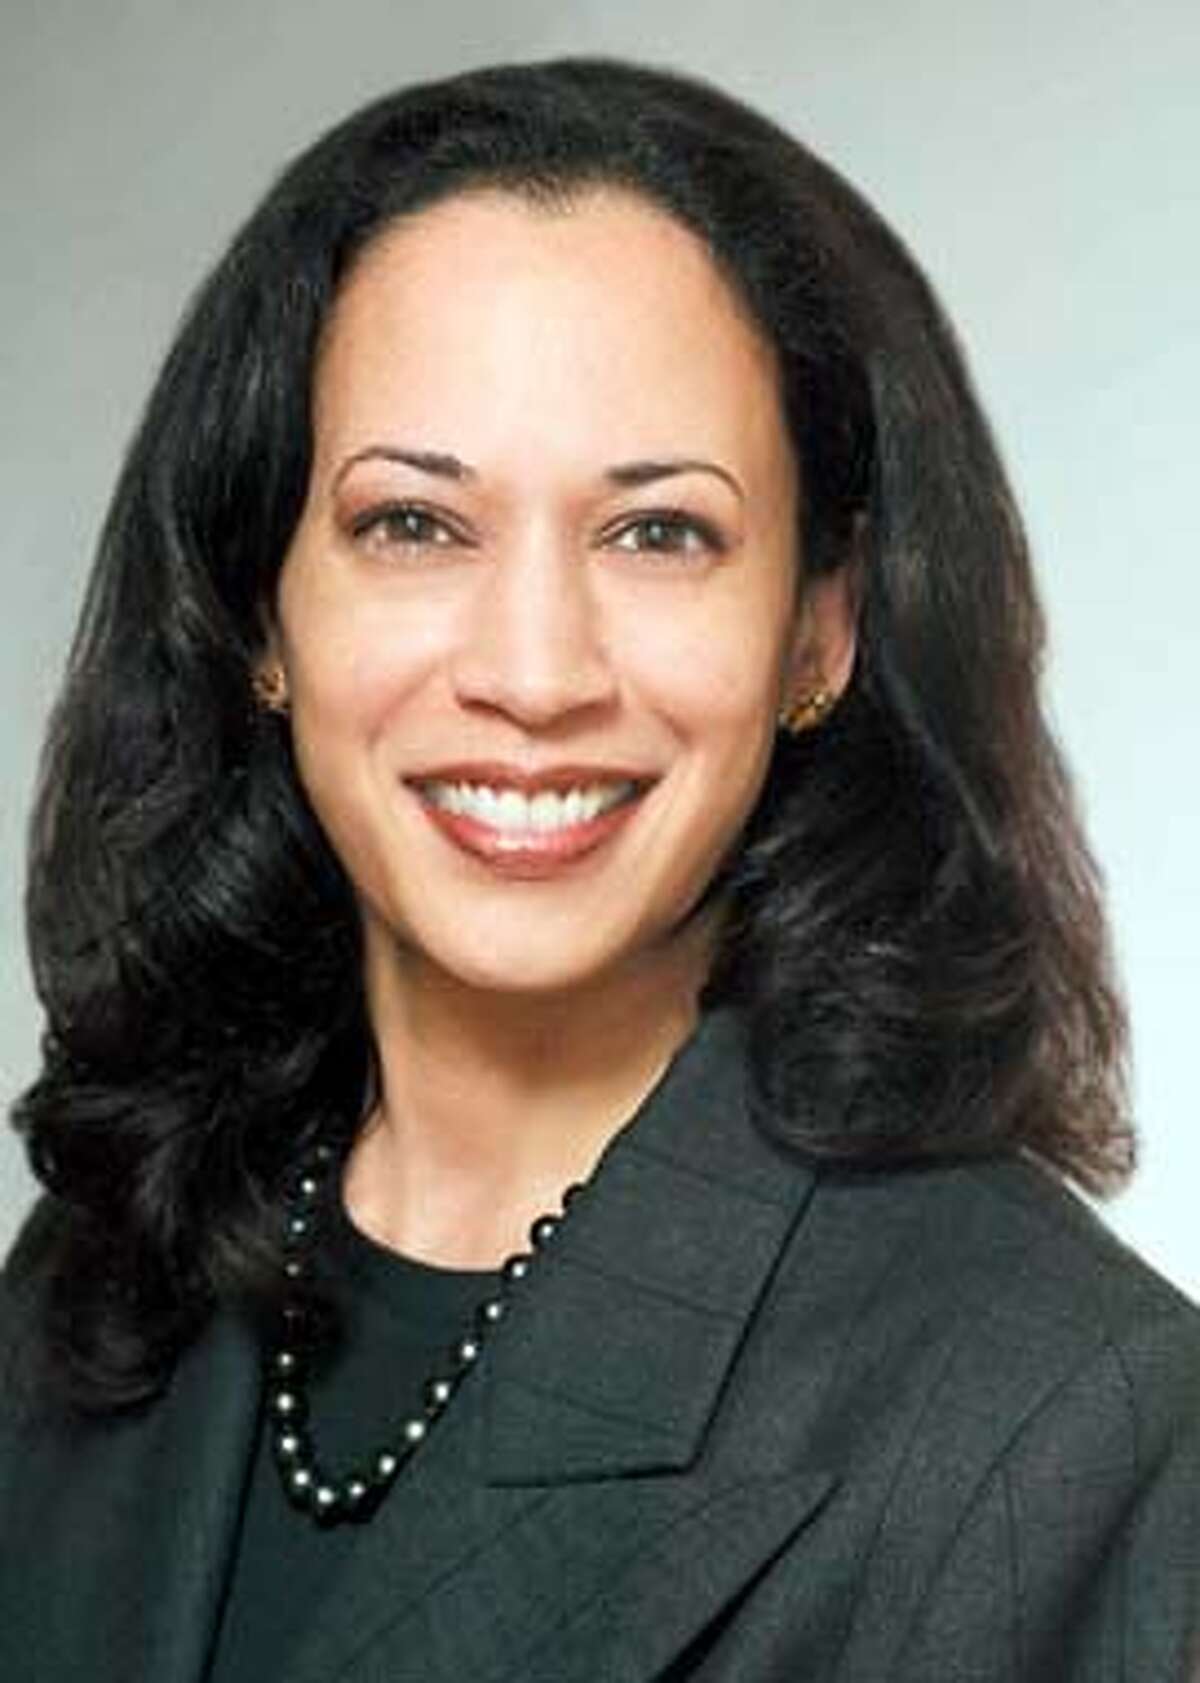 KAMALA , CANDIDATE FOR 2003 SAN FRANCISCO DISTRICT ATTORNEY